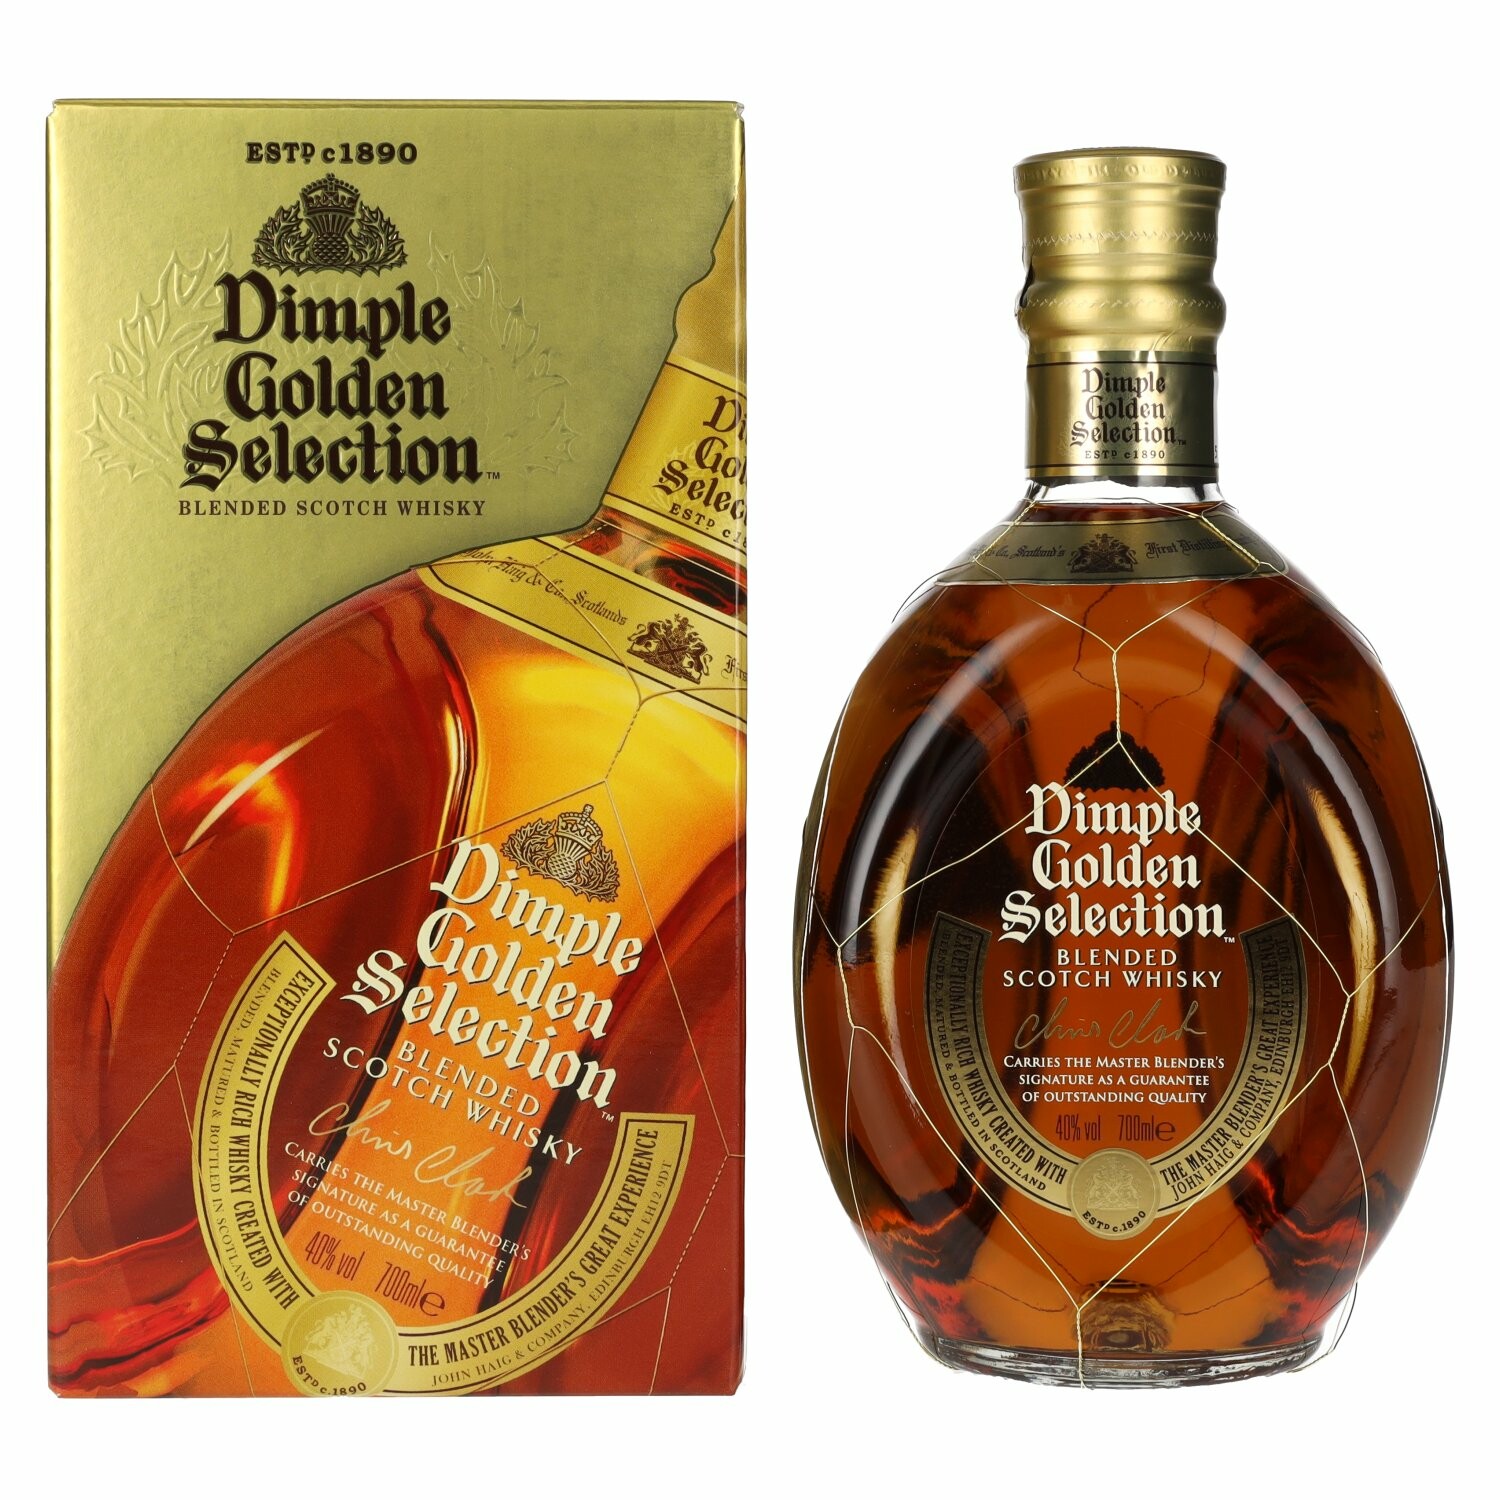 Dimple GOLDEN SELECTION Blended Scotch Whisky 40% Vol. 0,7l in Giftbox